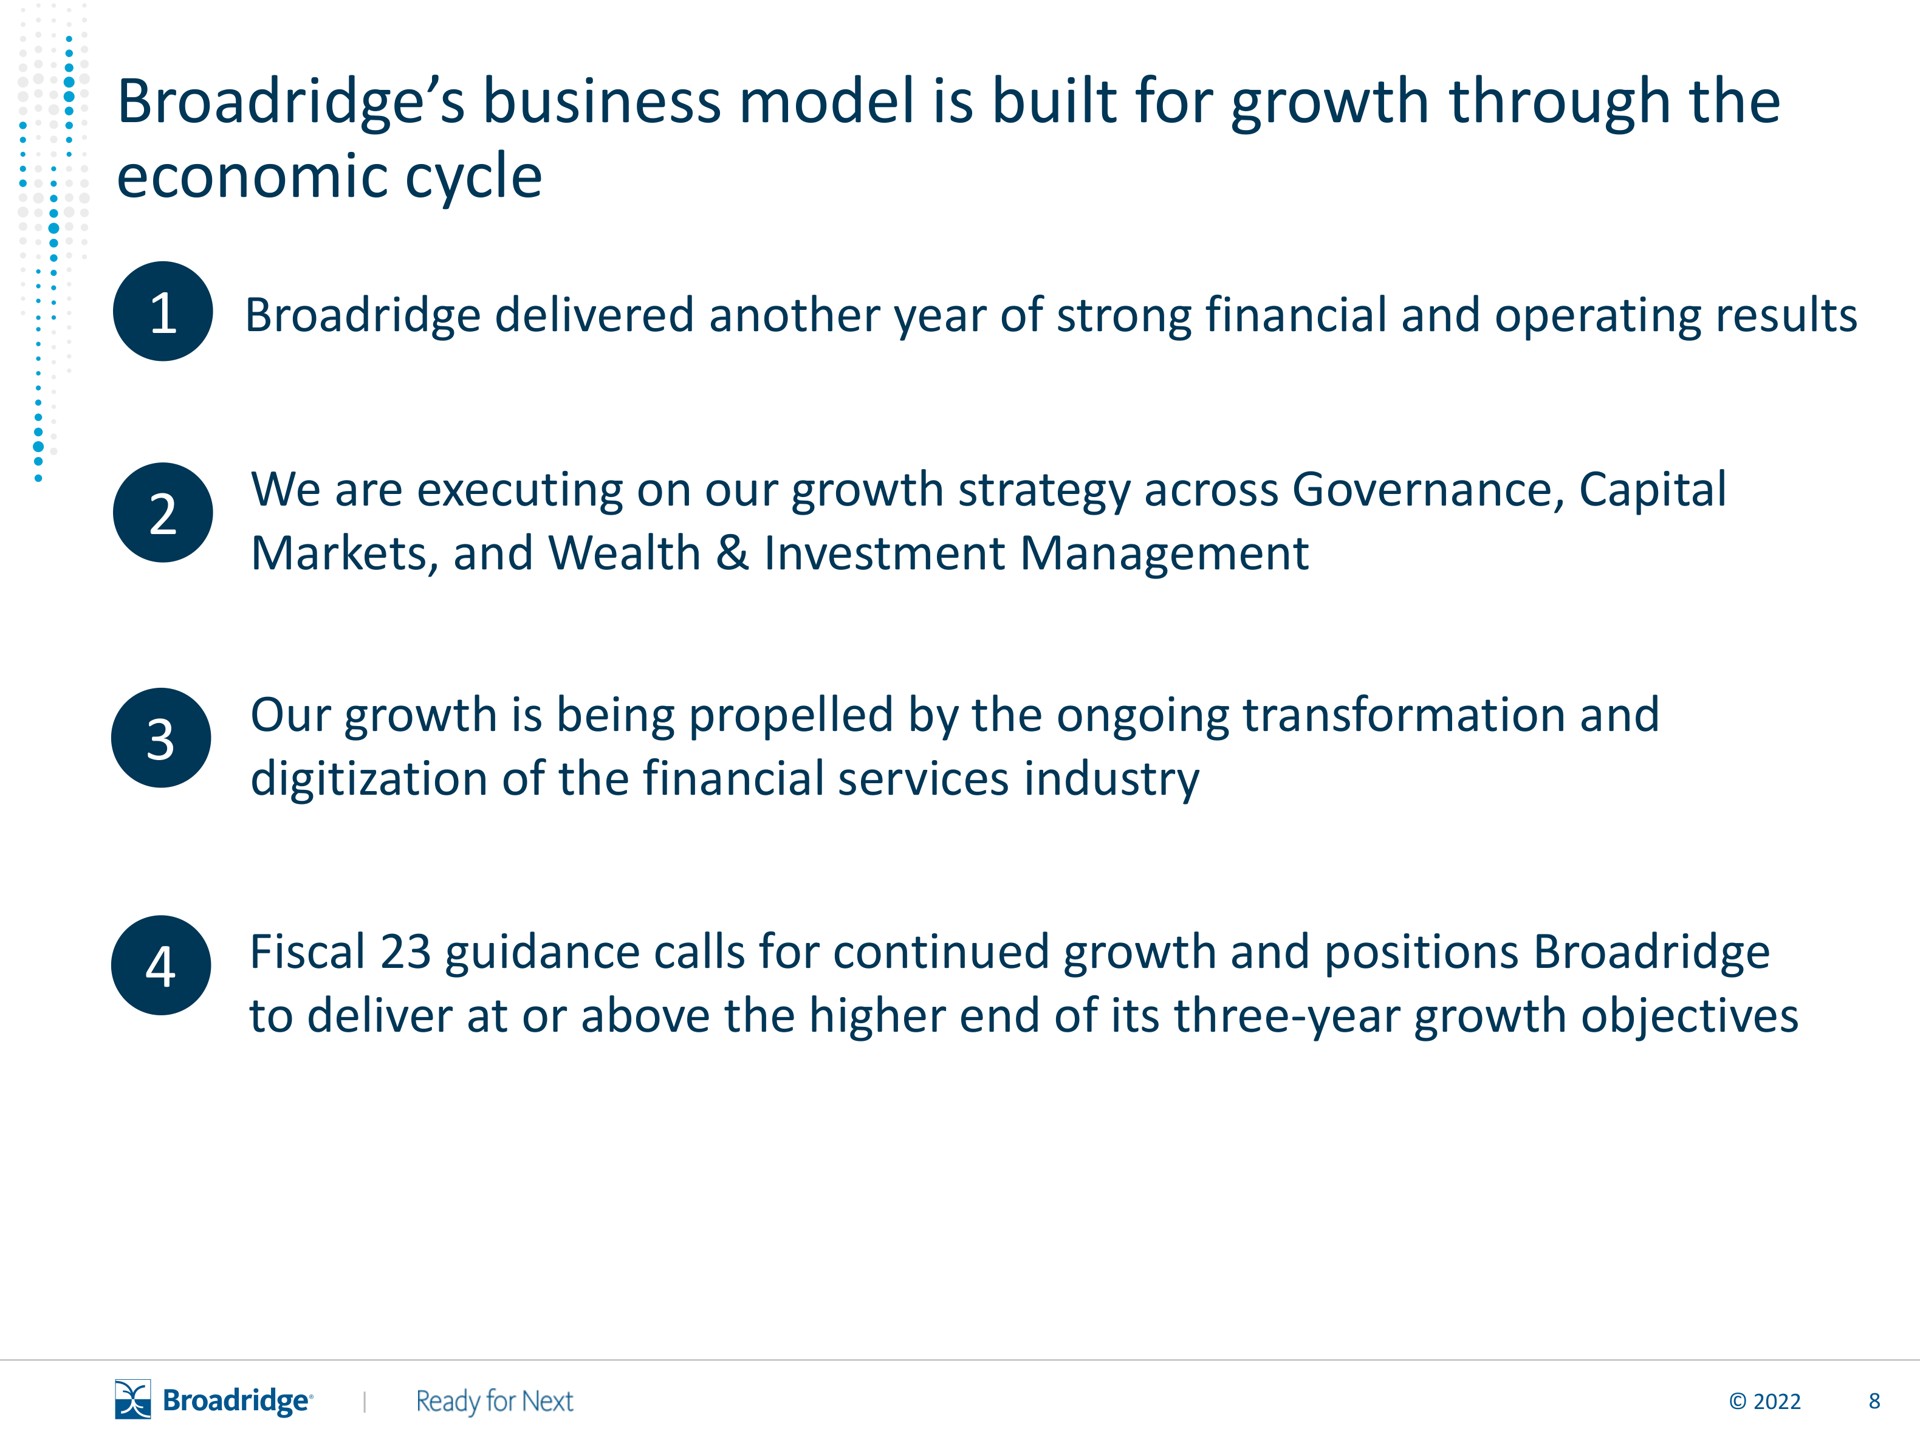 business model is built for growth through the economic cycle delivered another year of strong financial and operating results we are executing on our growth strategy across governance capital markets and wealth investment management our growth is being by the ongoing transformation and of the financial services industry fiscal guidance calls for continued growth and positions to deliver at or above the higher end of its three year growth objectives | Broadridge Financial Solutions